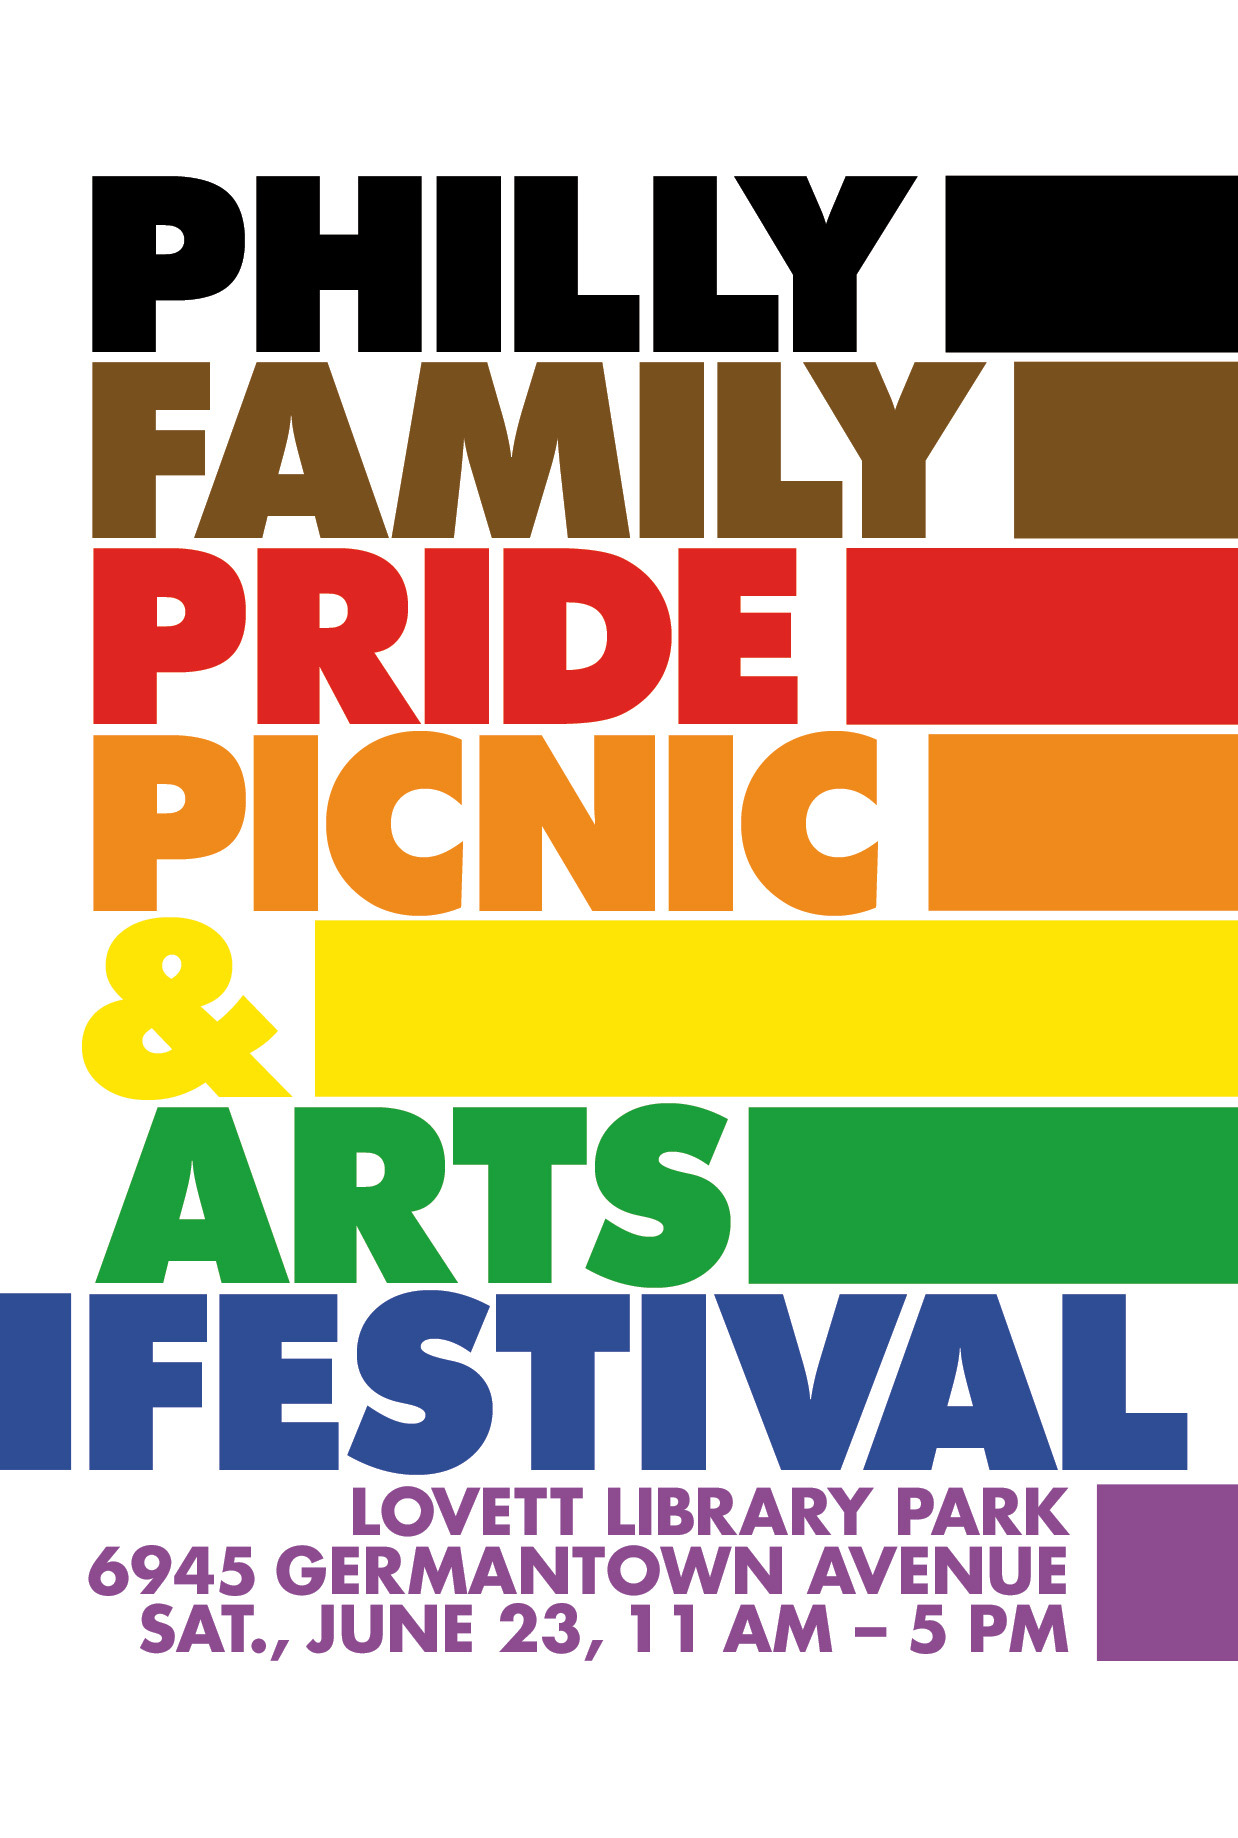 Philly Family Pride Picnic and Arts Festival - Poster Design